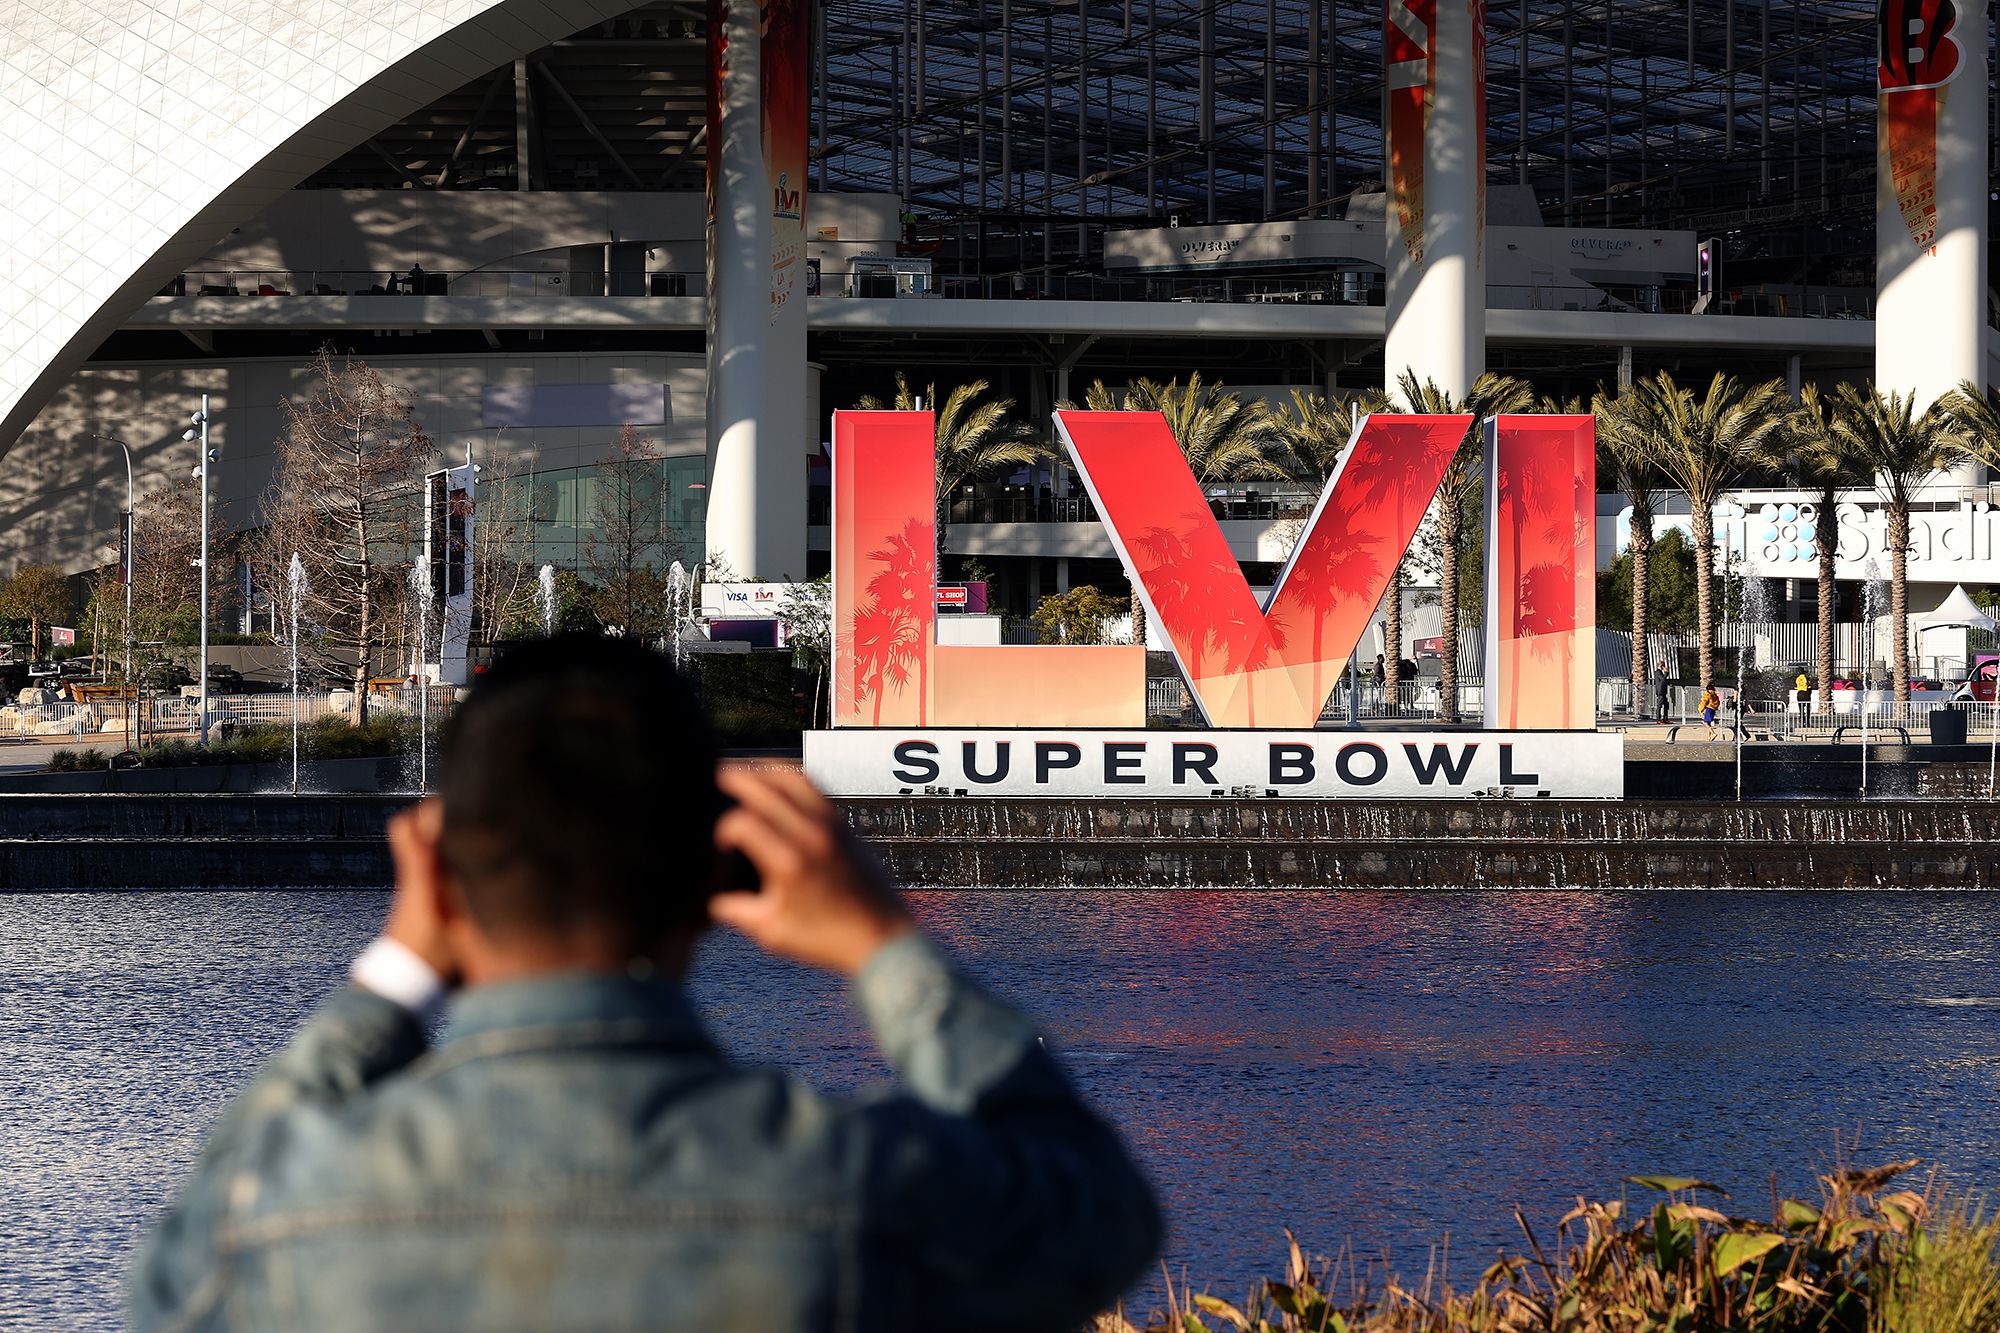 Super Bowl ticket prices have dropped but they'll still cost you thousands